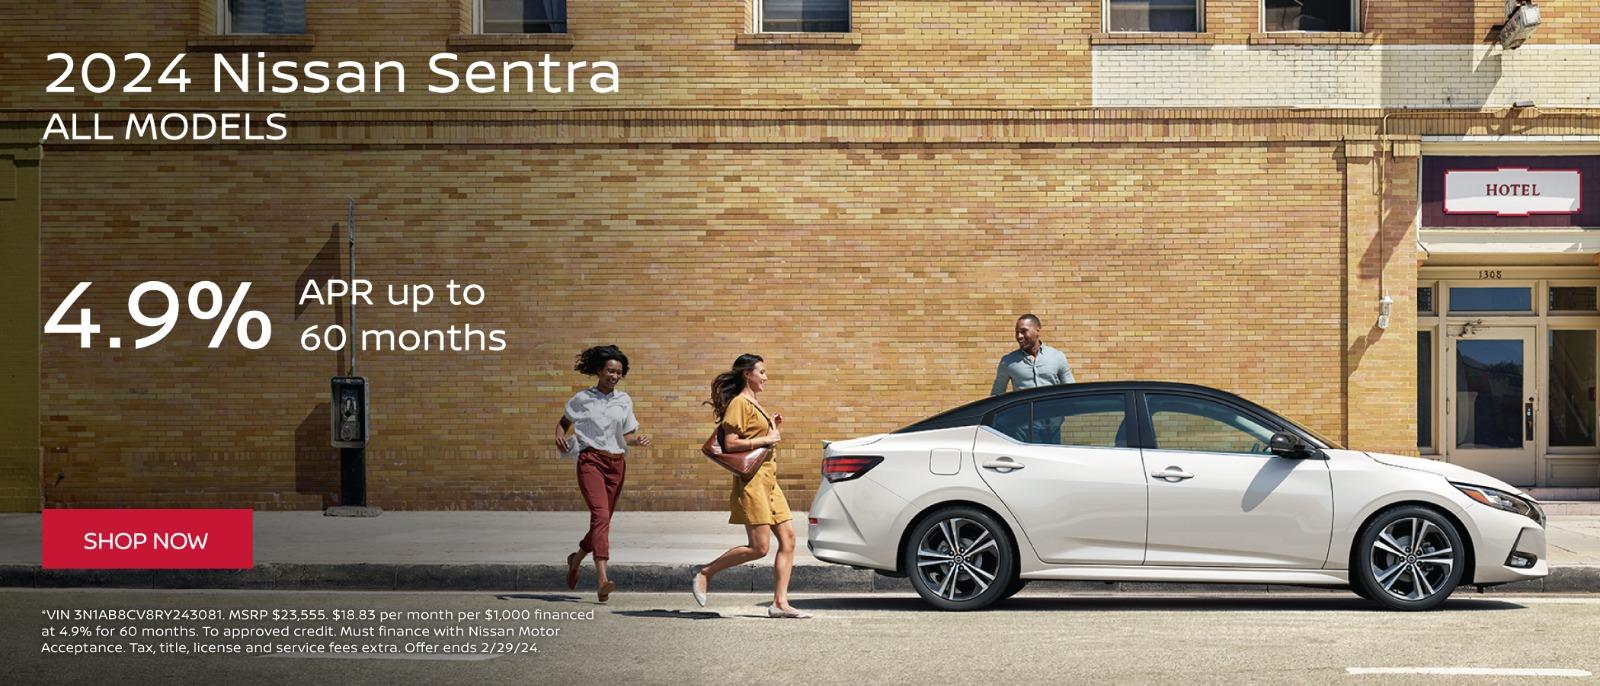 2023 Nissan Sentra 4.9% APR up to 60 months